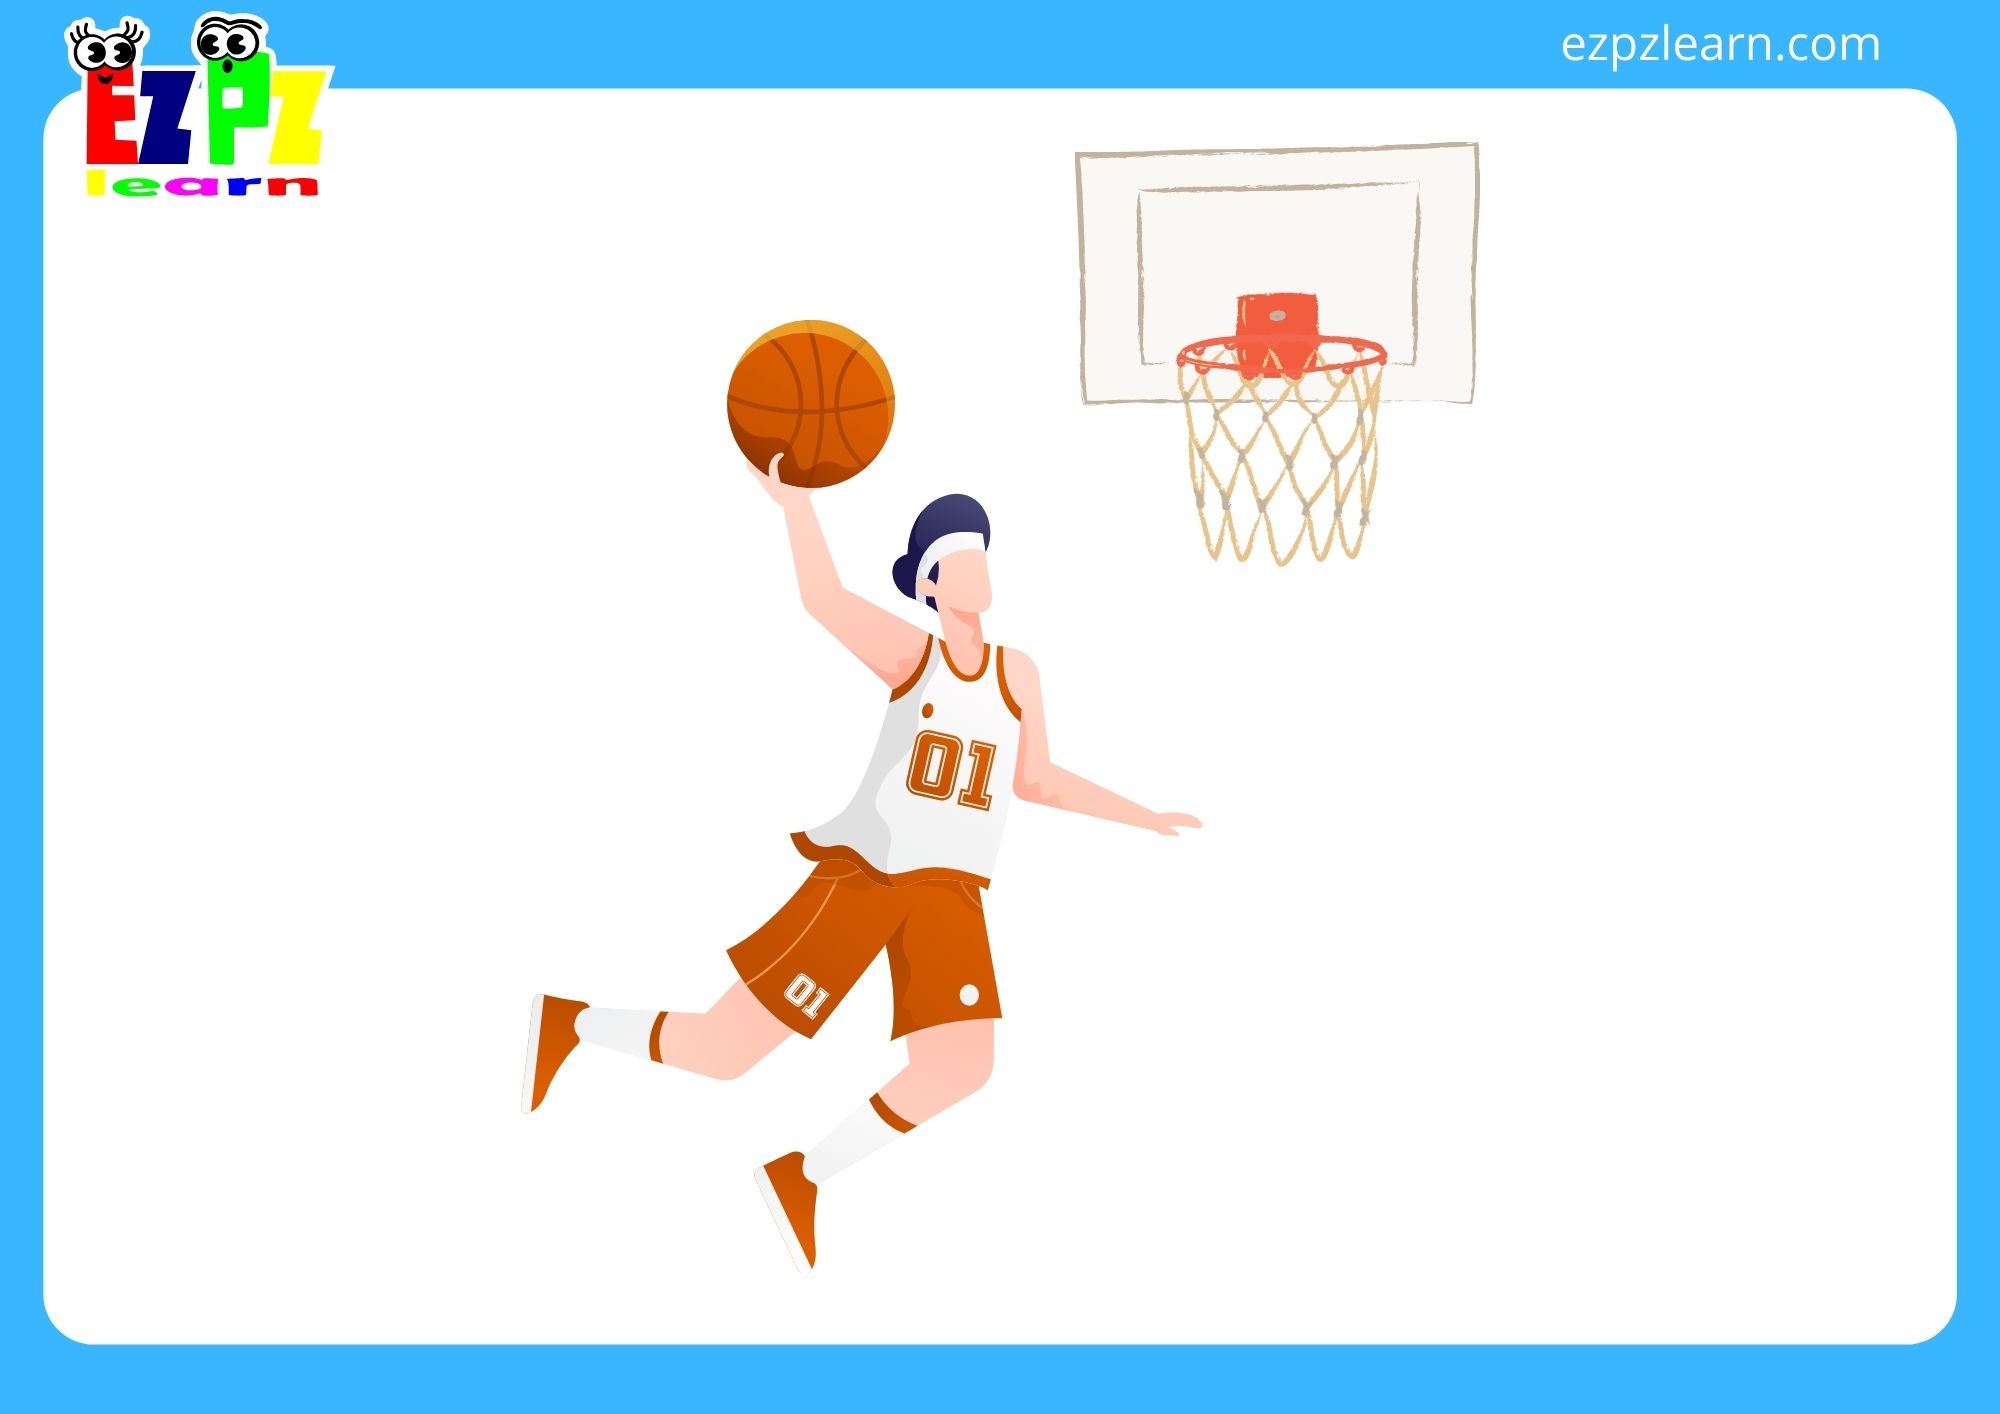 Sports No Words Flashcards View Online or Free PDF Download